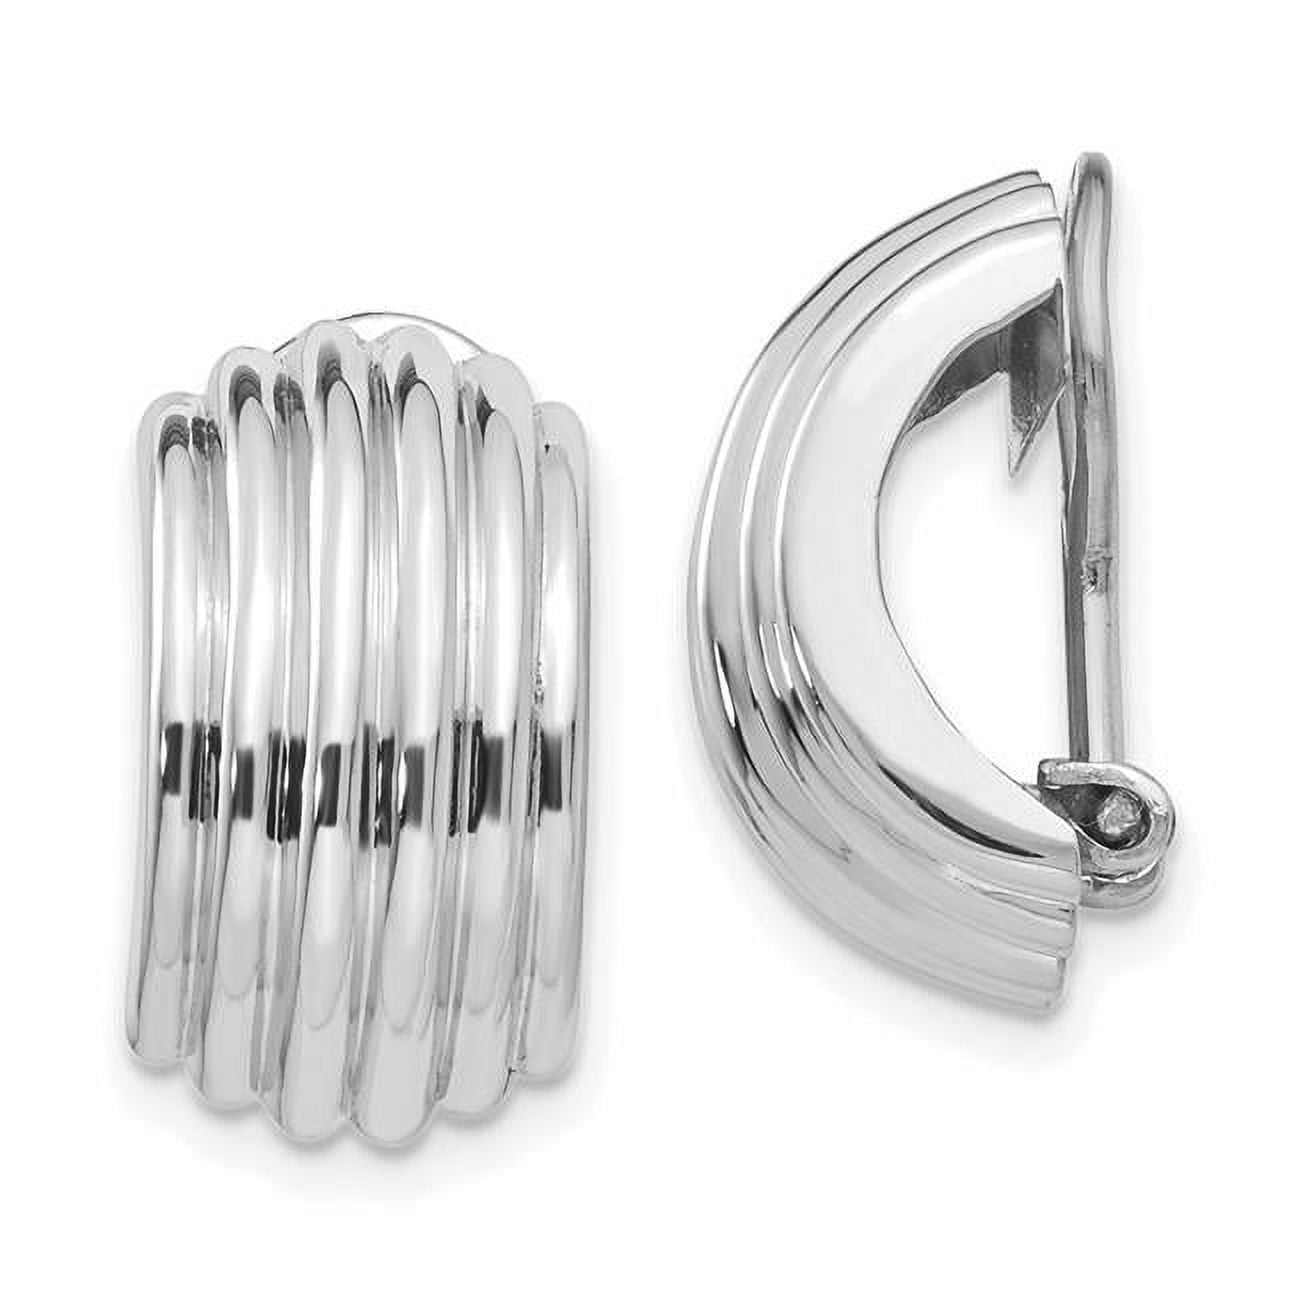 14K White Gold Earring Backs Only, For Post Thickness of 0.65mm, Pairs  Screwback - White Gold 